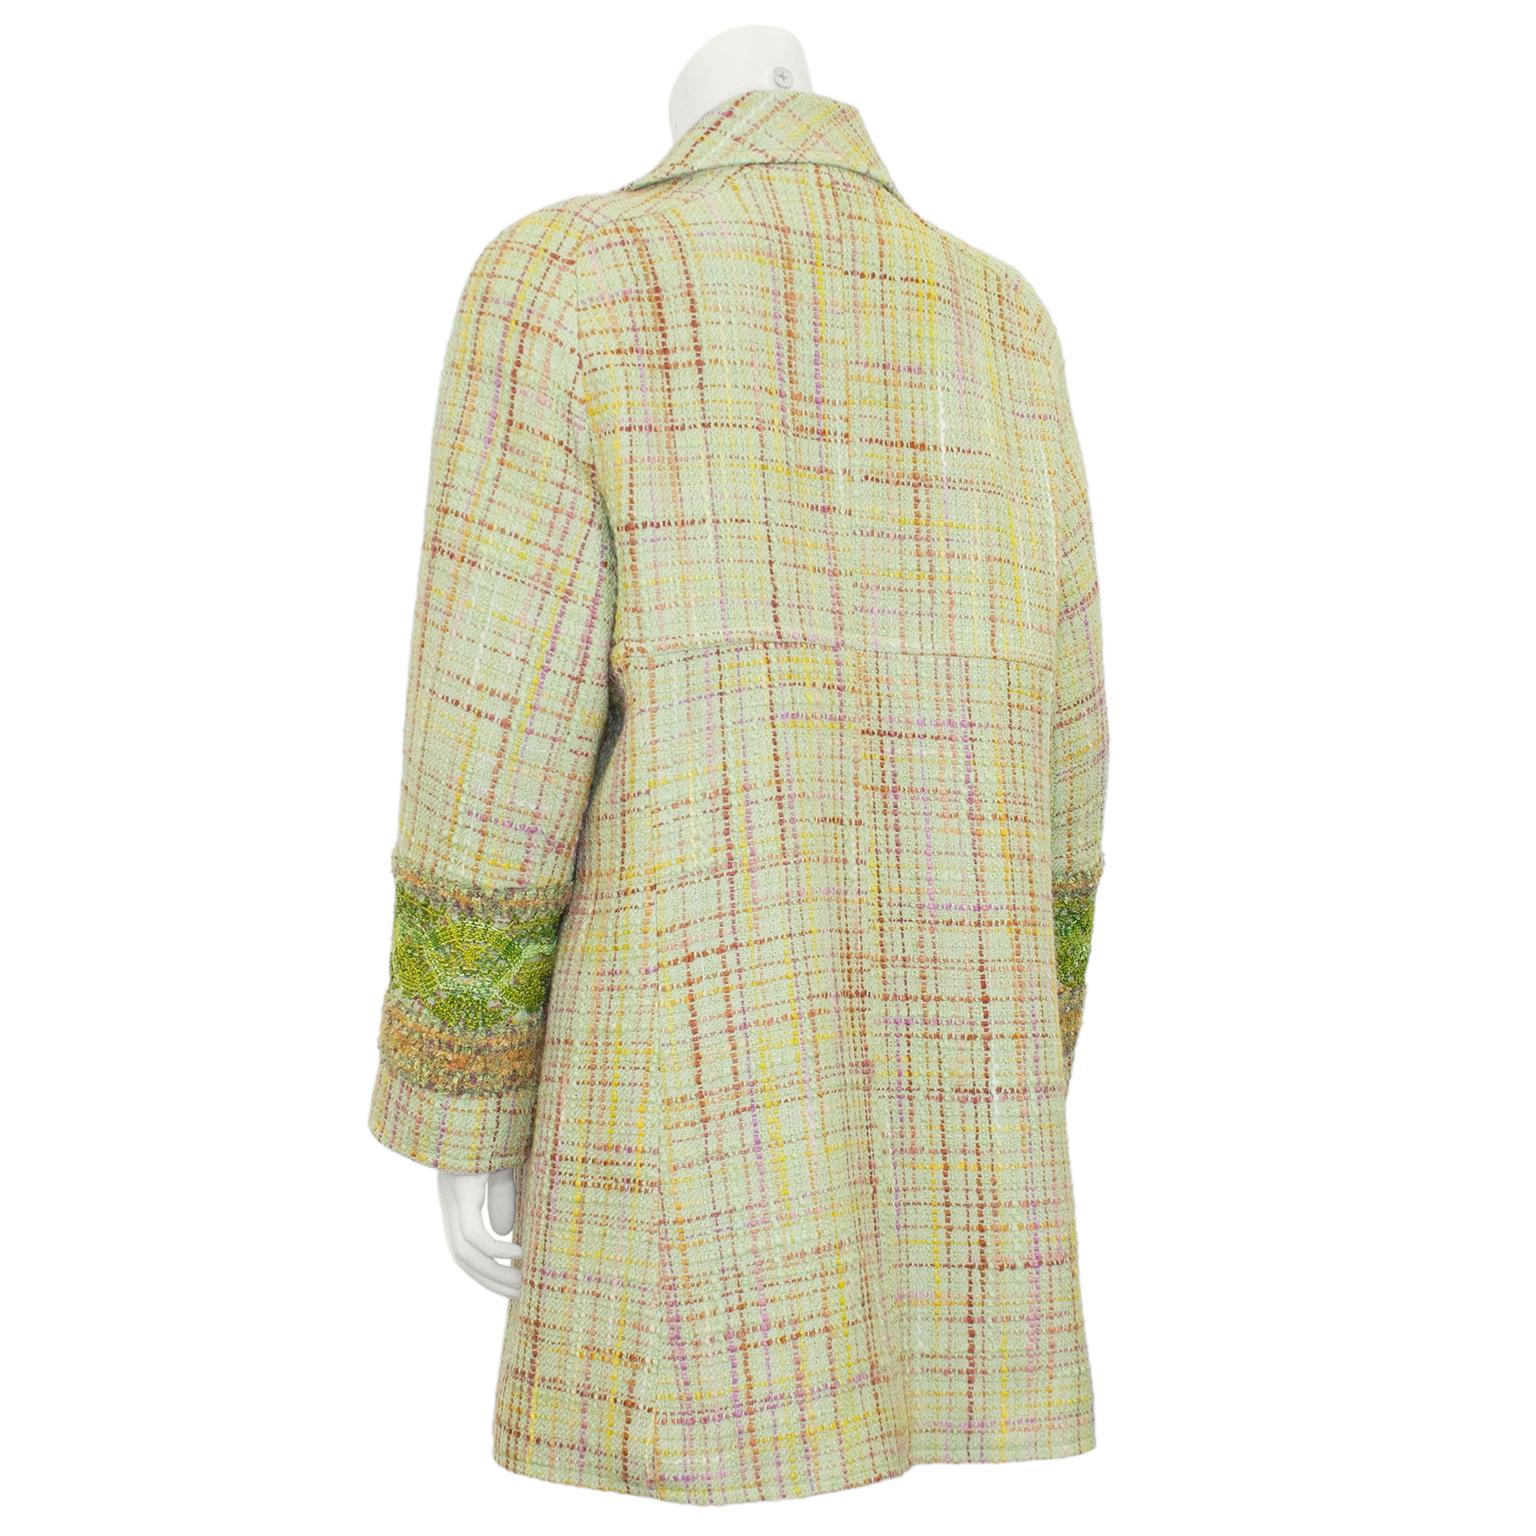 Beige 1990s Christian Lacroix Pastel Green Long Tweed Jacket and Skirt Ensemble For Sale